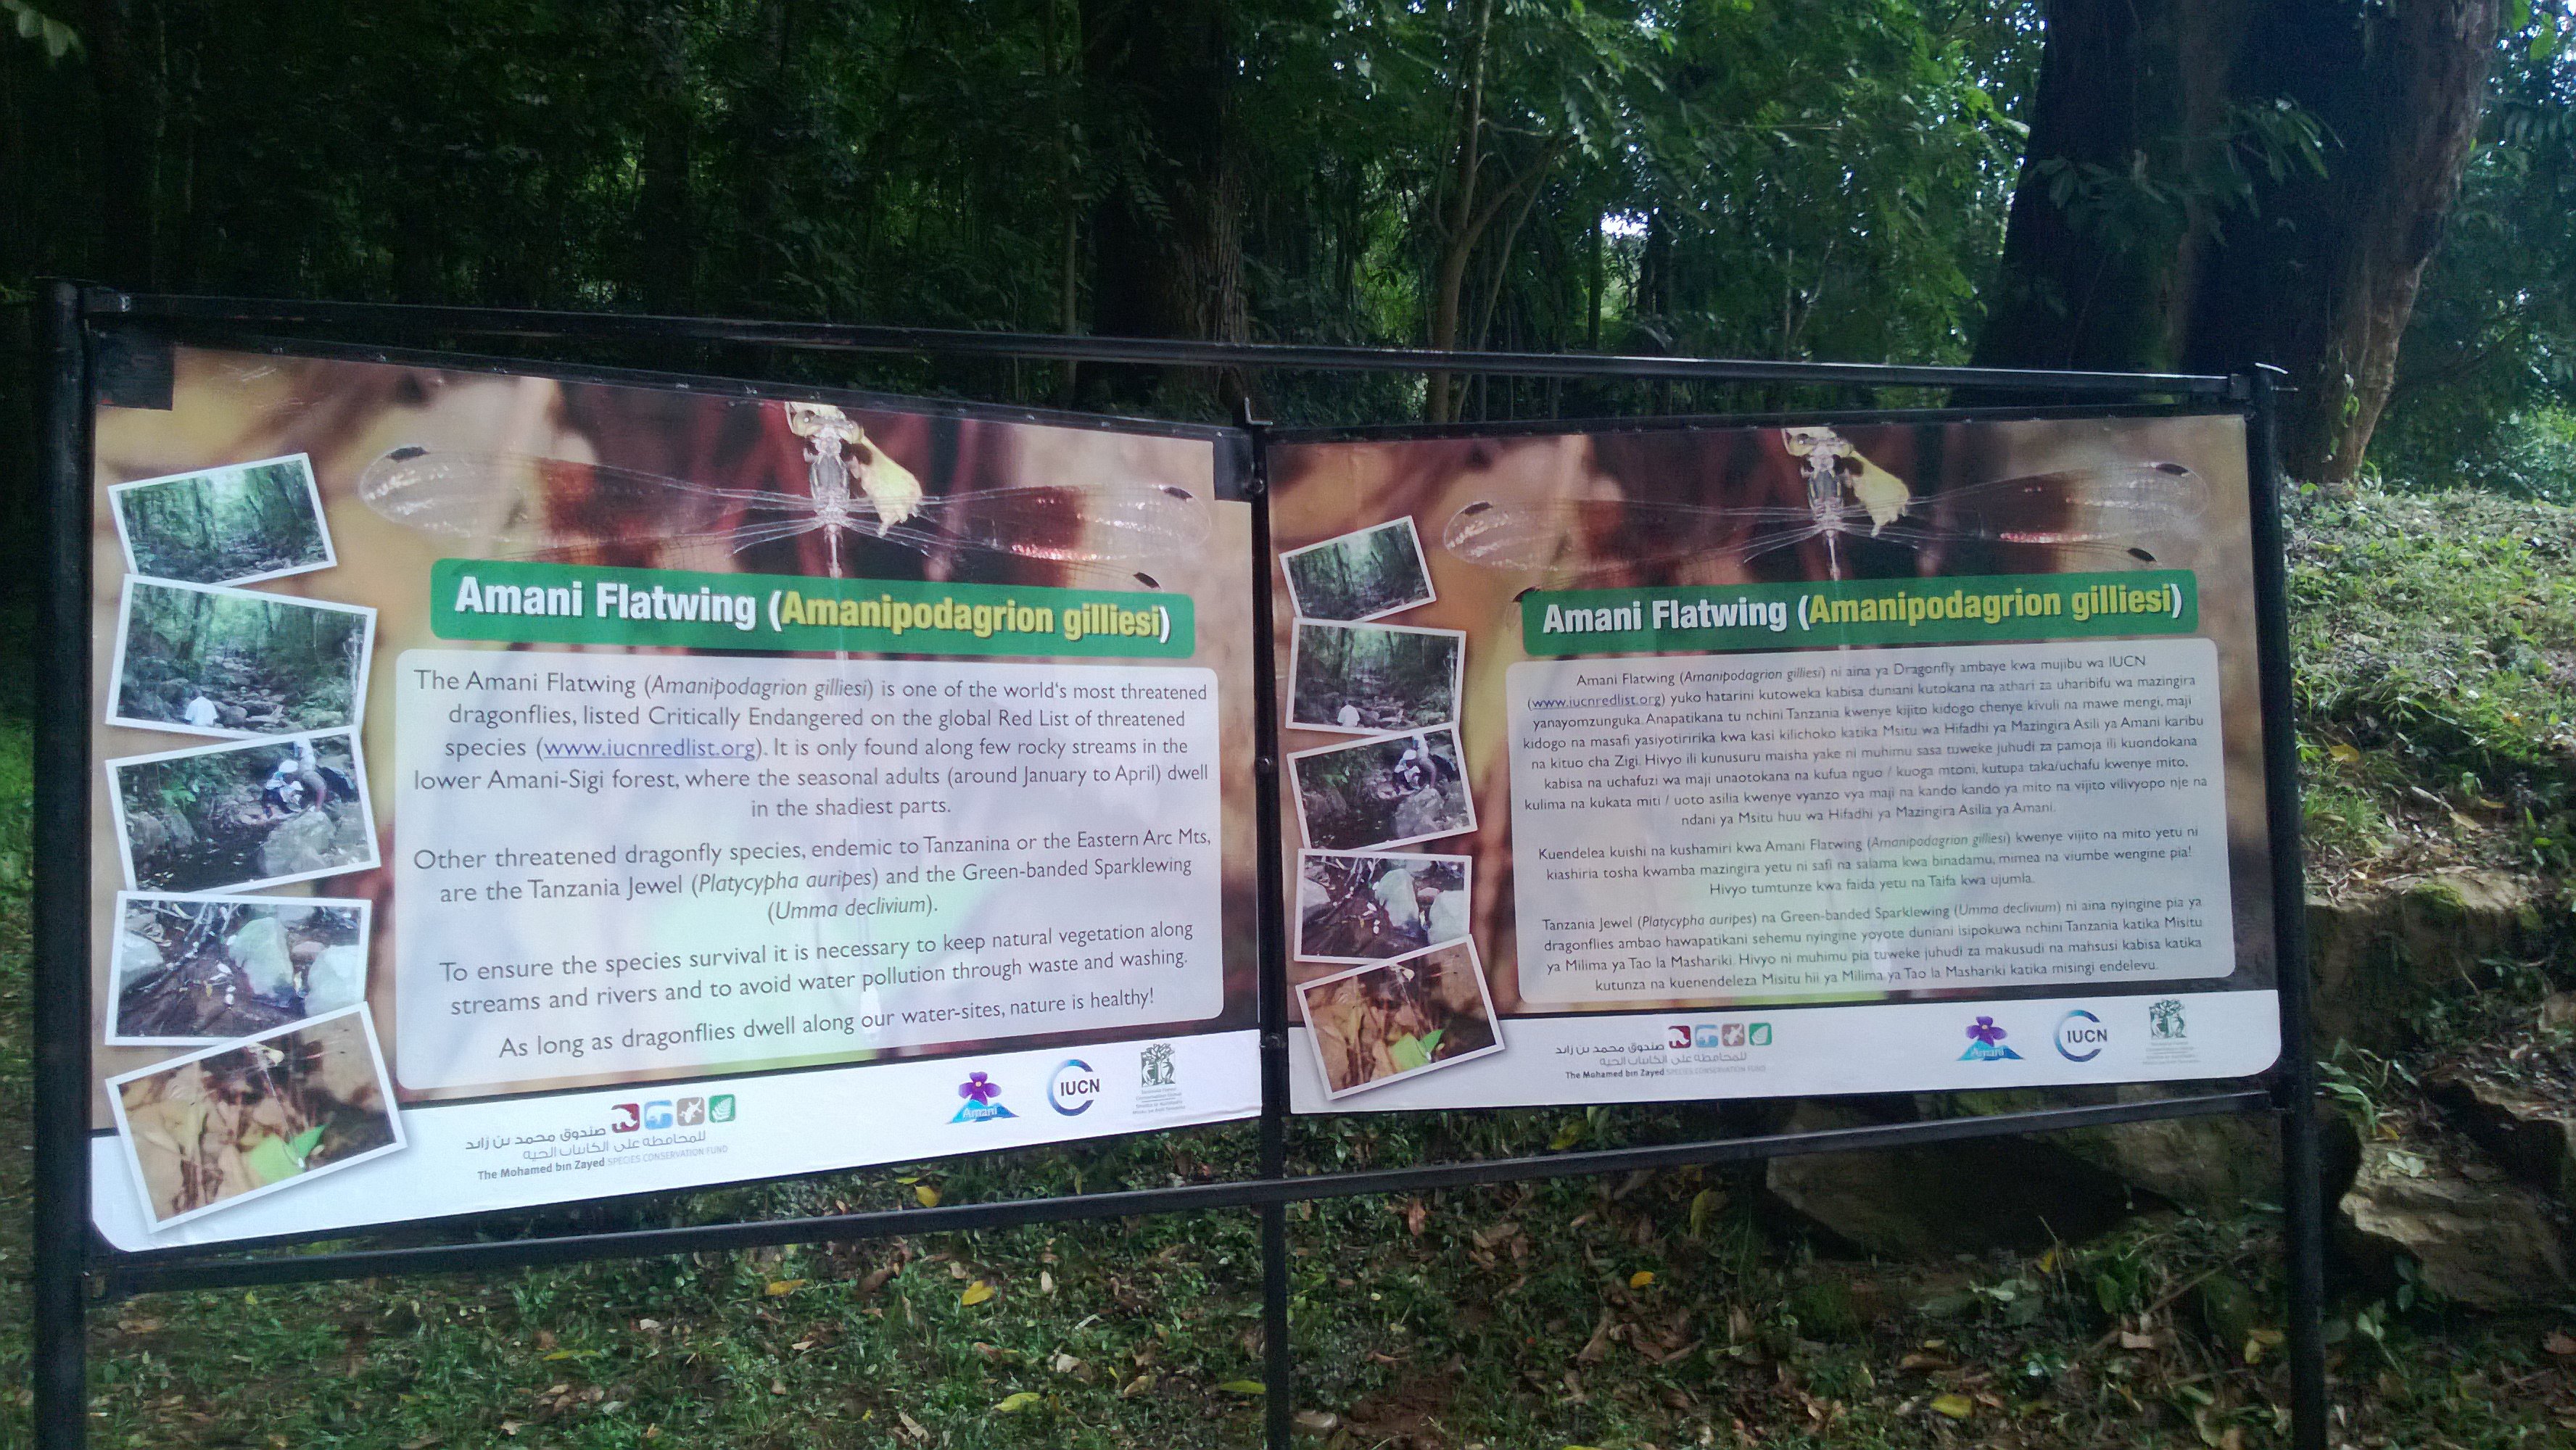 Signs informing people about the Amani flatwing and how to conserve its habitat. Credit: Viola Clausnitzer